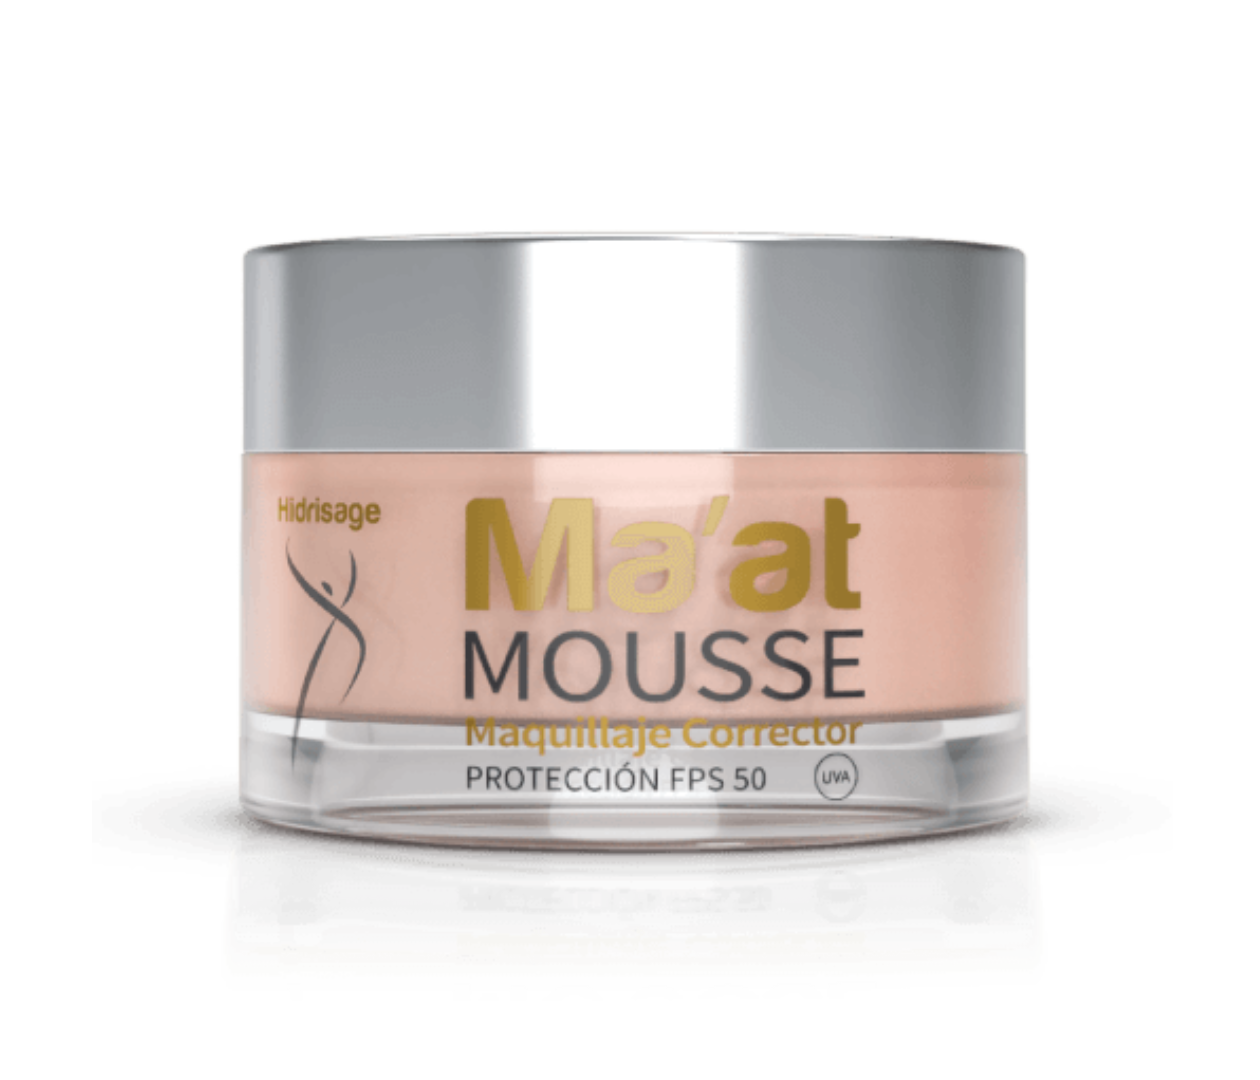 Ma'at Mousse Maquillaje Corrector